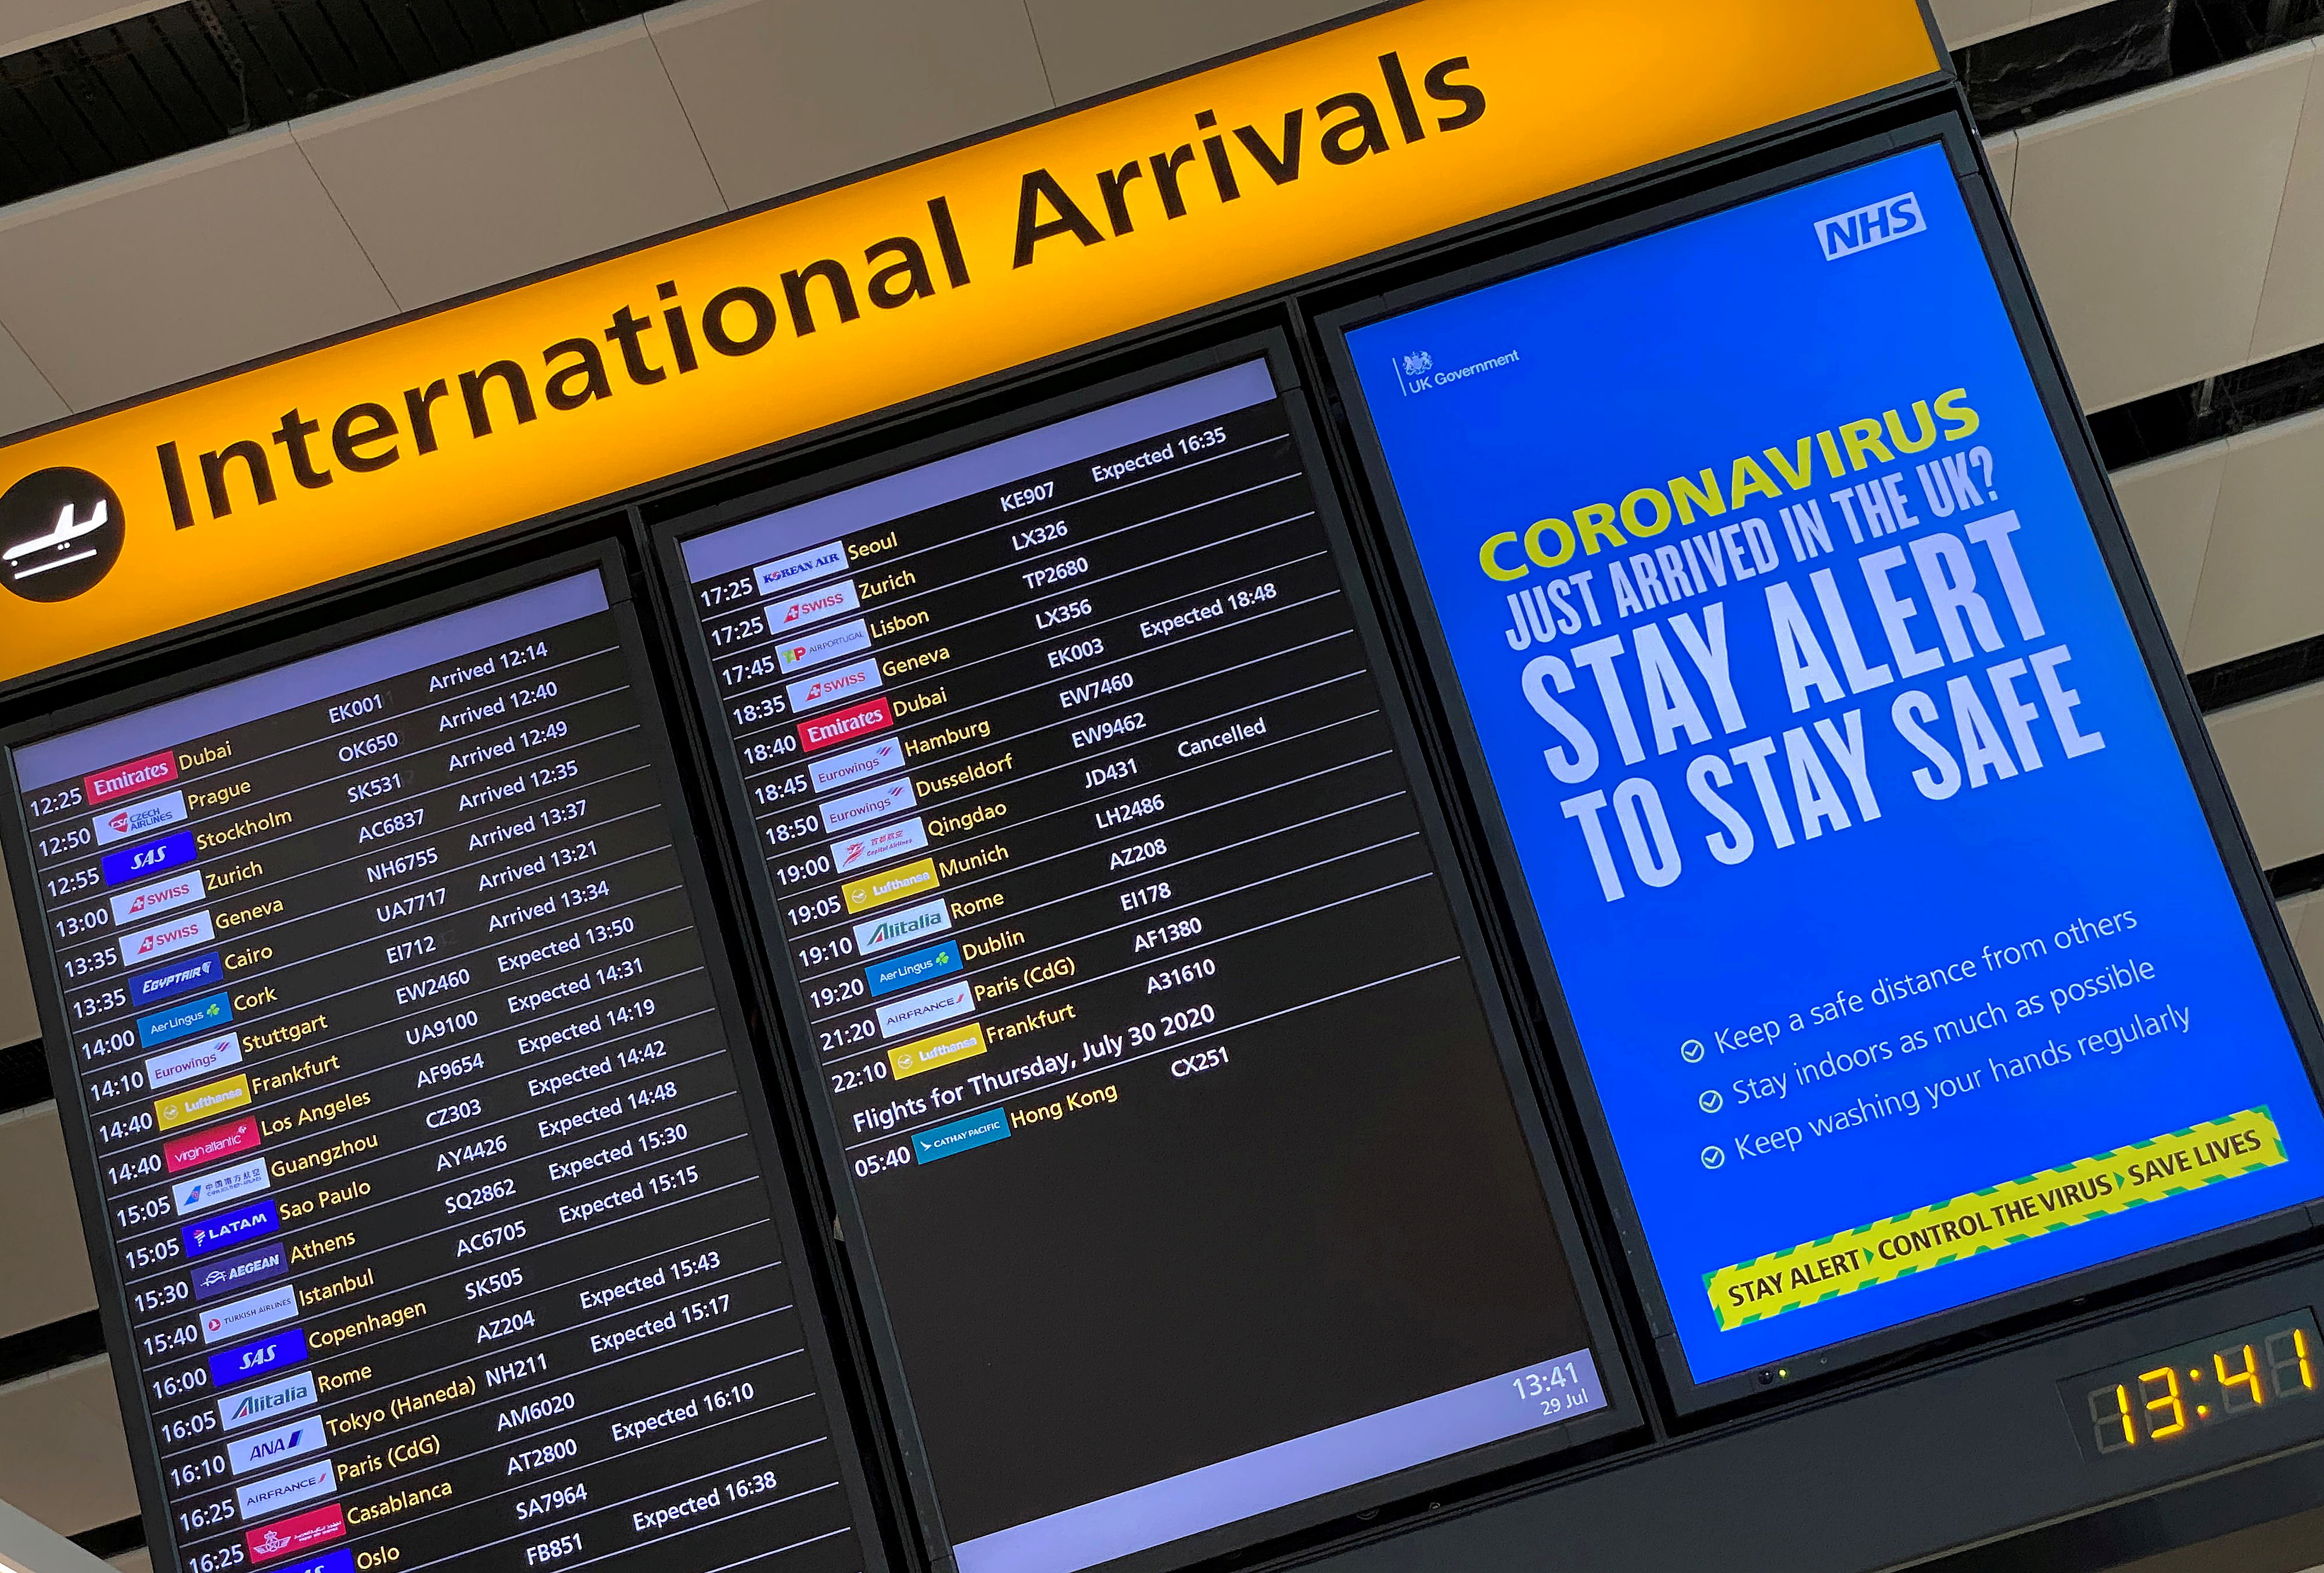 A public health campaign message is displayed on an arrivals information board at Heathrow Airport, following the outbreak of the coronavirus disease (COVID-19), London, Britain